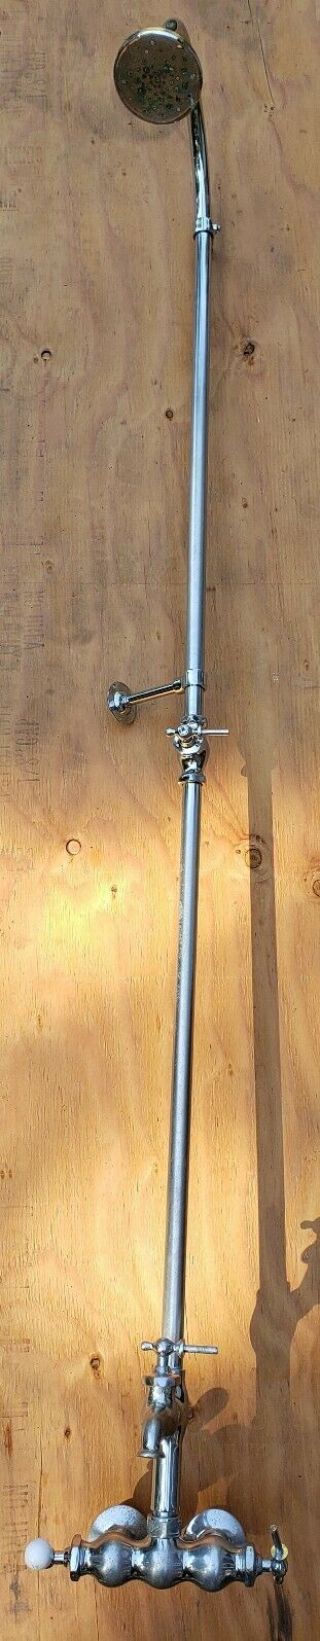 Vintage Faucet Brass & Porcelain Wall Mounted Exposed Shower